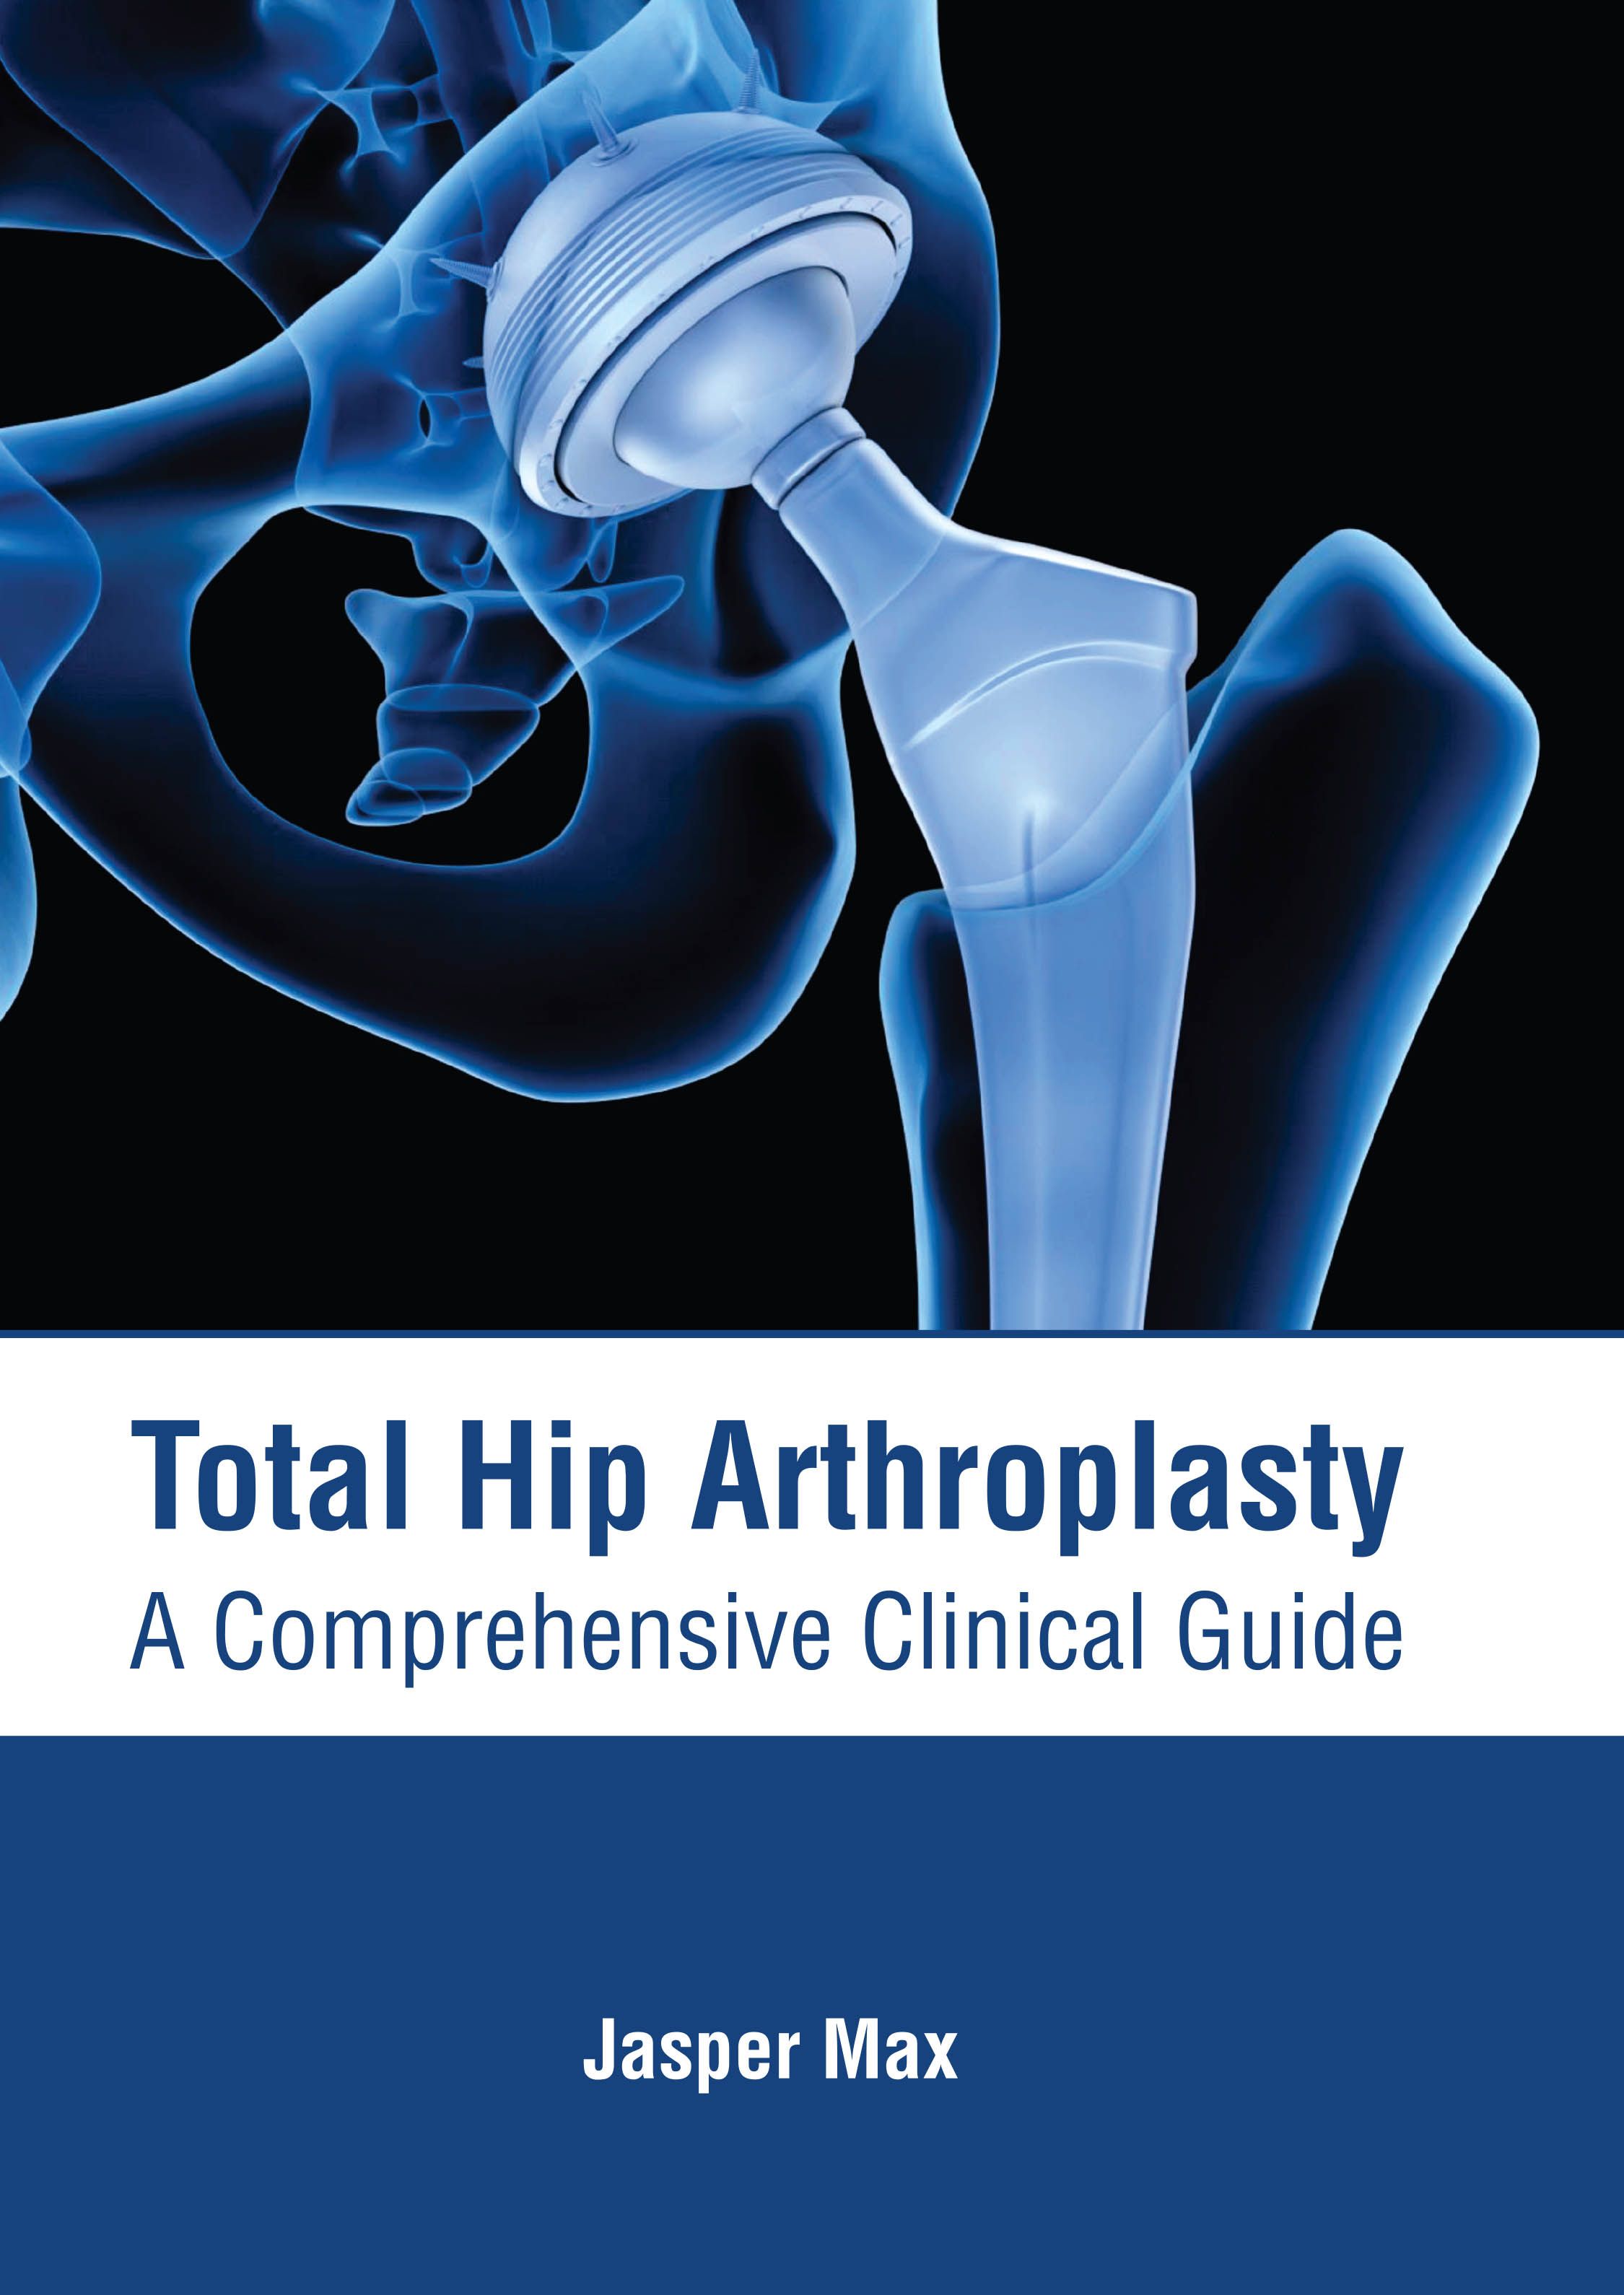 TOTAL HIP ARTHROPLASTY: A COMPREHENSIVE CLINICAL GUIDE | ISBN: 9781639274048